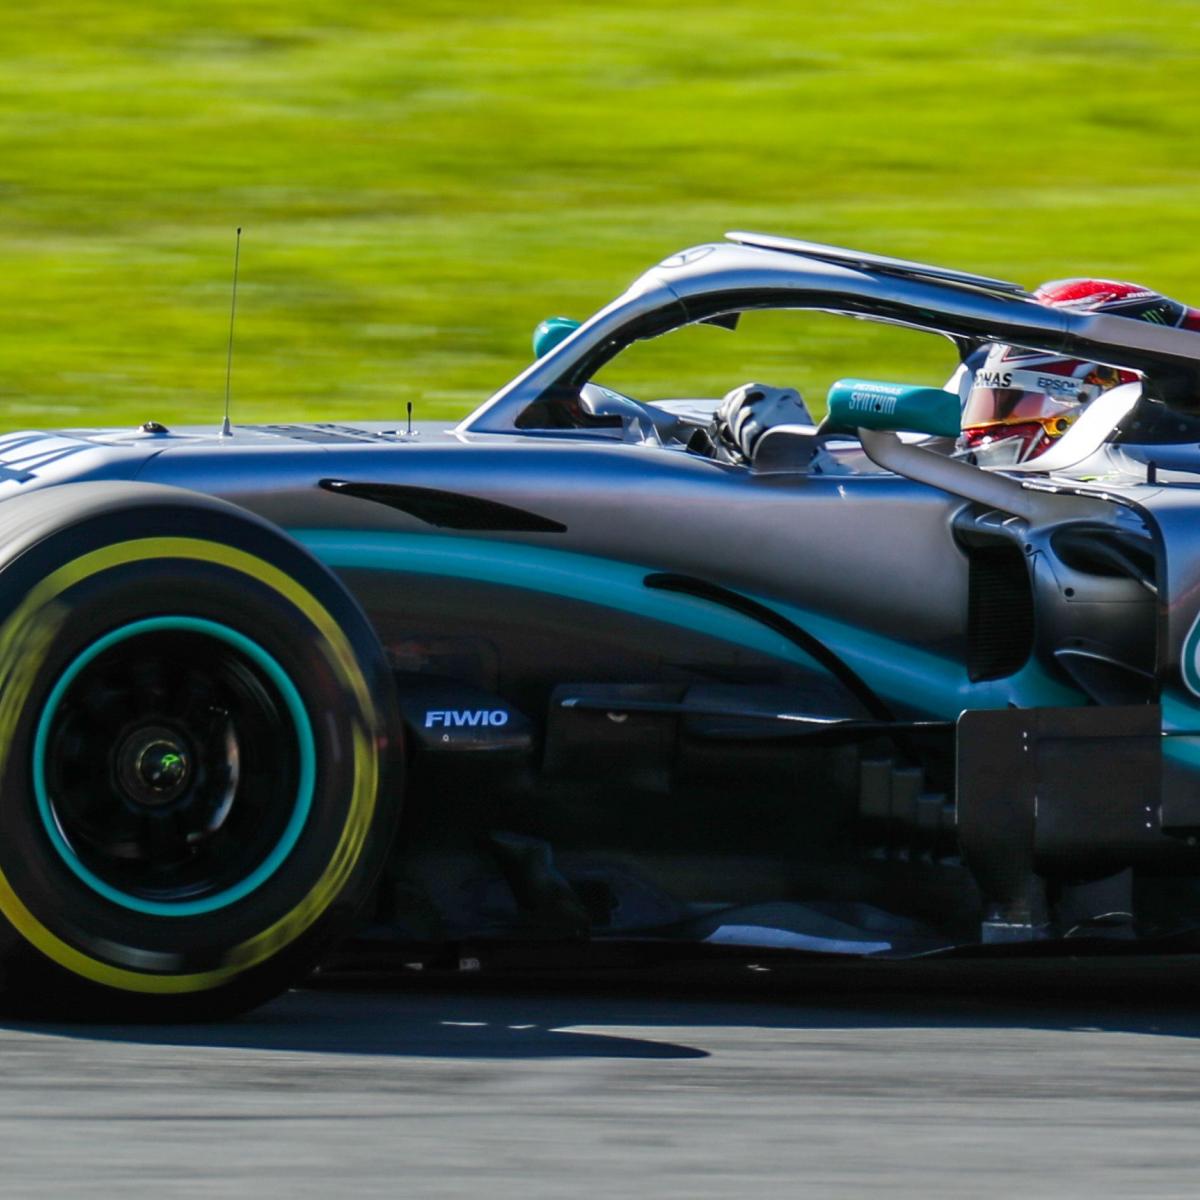 Australian F1 Grand Prix 2019: Time, Drivers, TV Schedule and More | Bleacher Report | Latest News, and Highlights